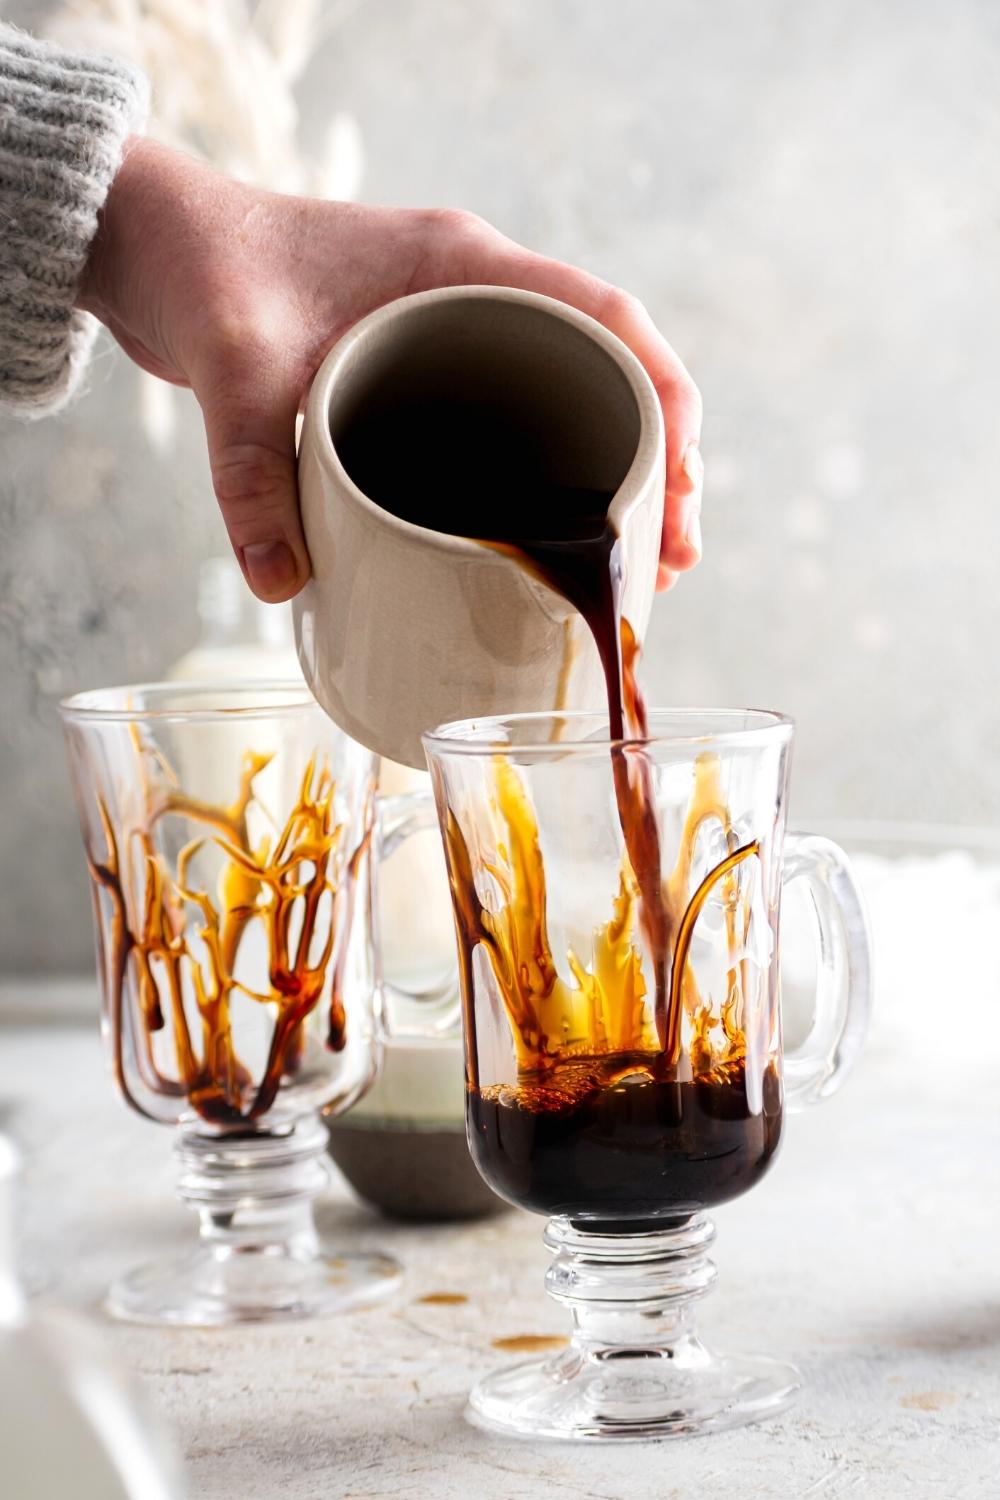 A hand holding a pitcher of caramel cold brew pouring it into a glass cup that has caramel sauce on the edges.